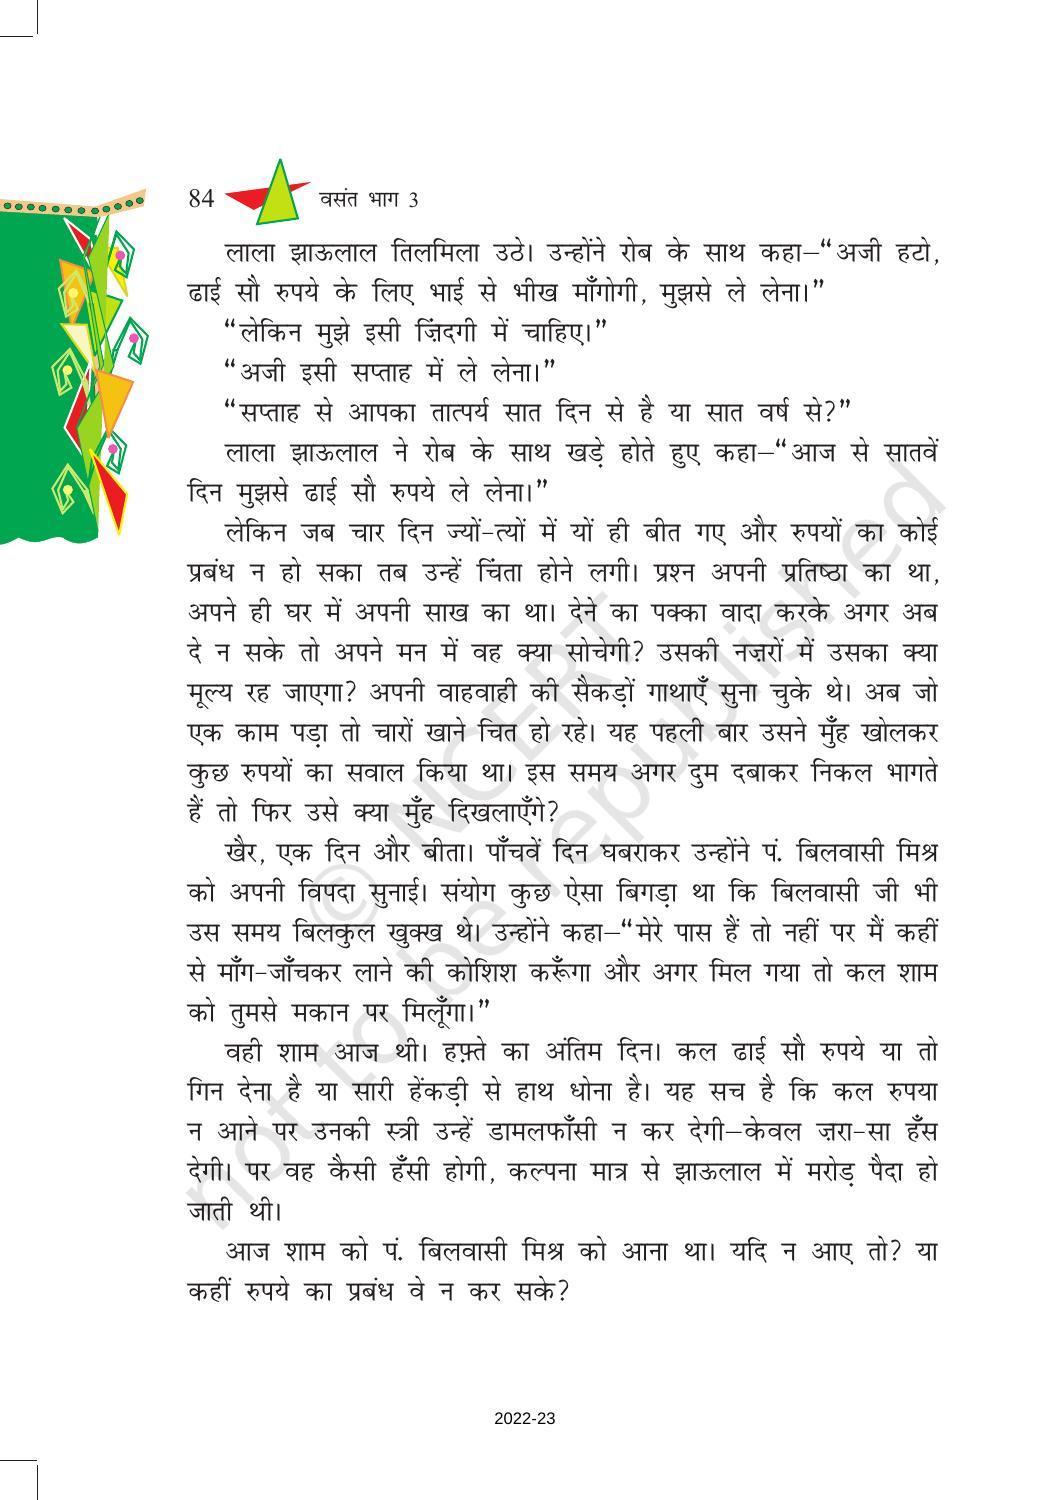 NCERT Book for Class 8 Hindi Vasant Chapter 14 अकबरी लोटा - Page 2